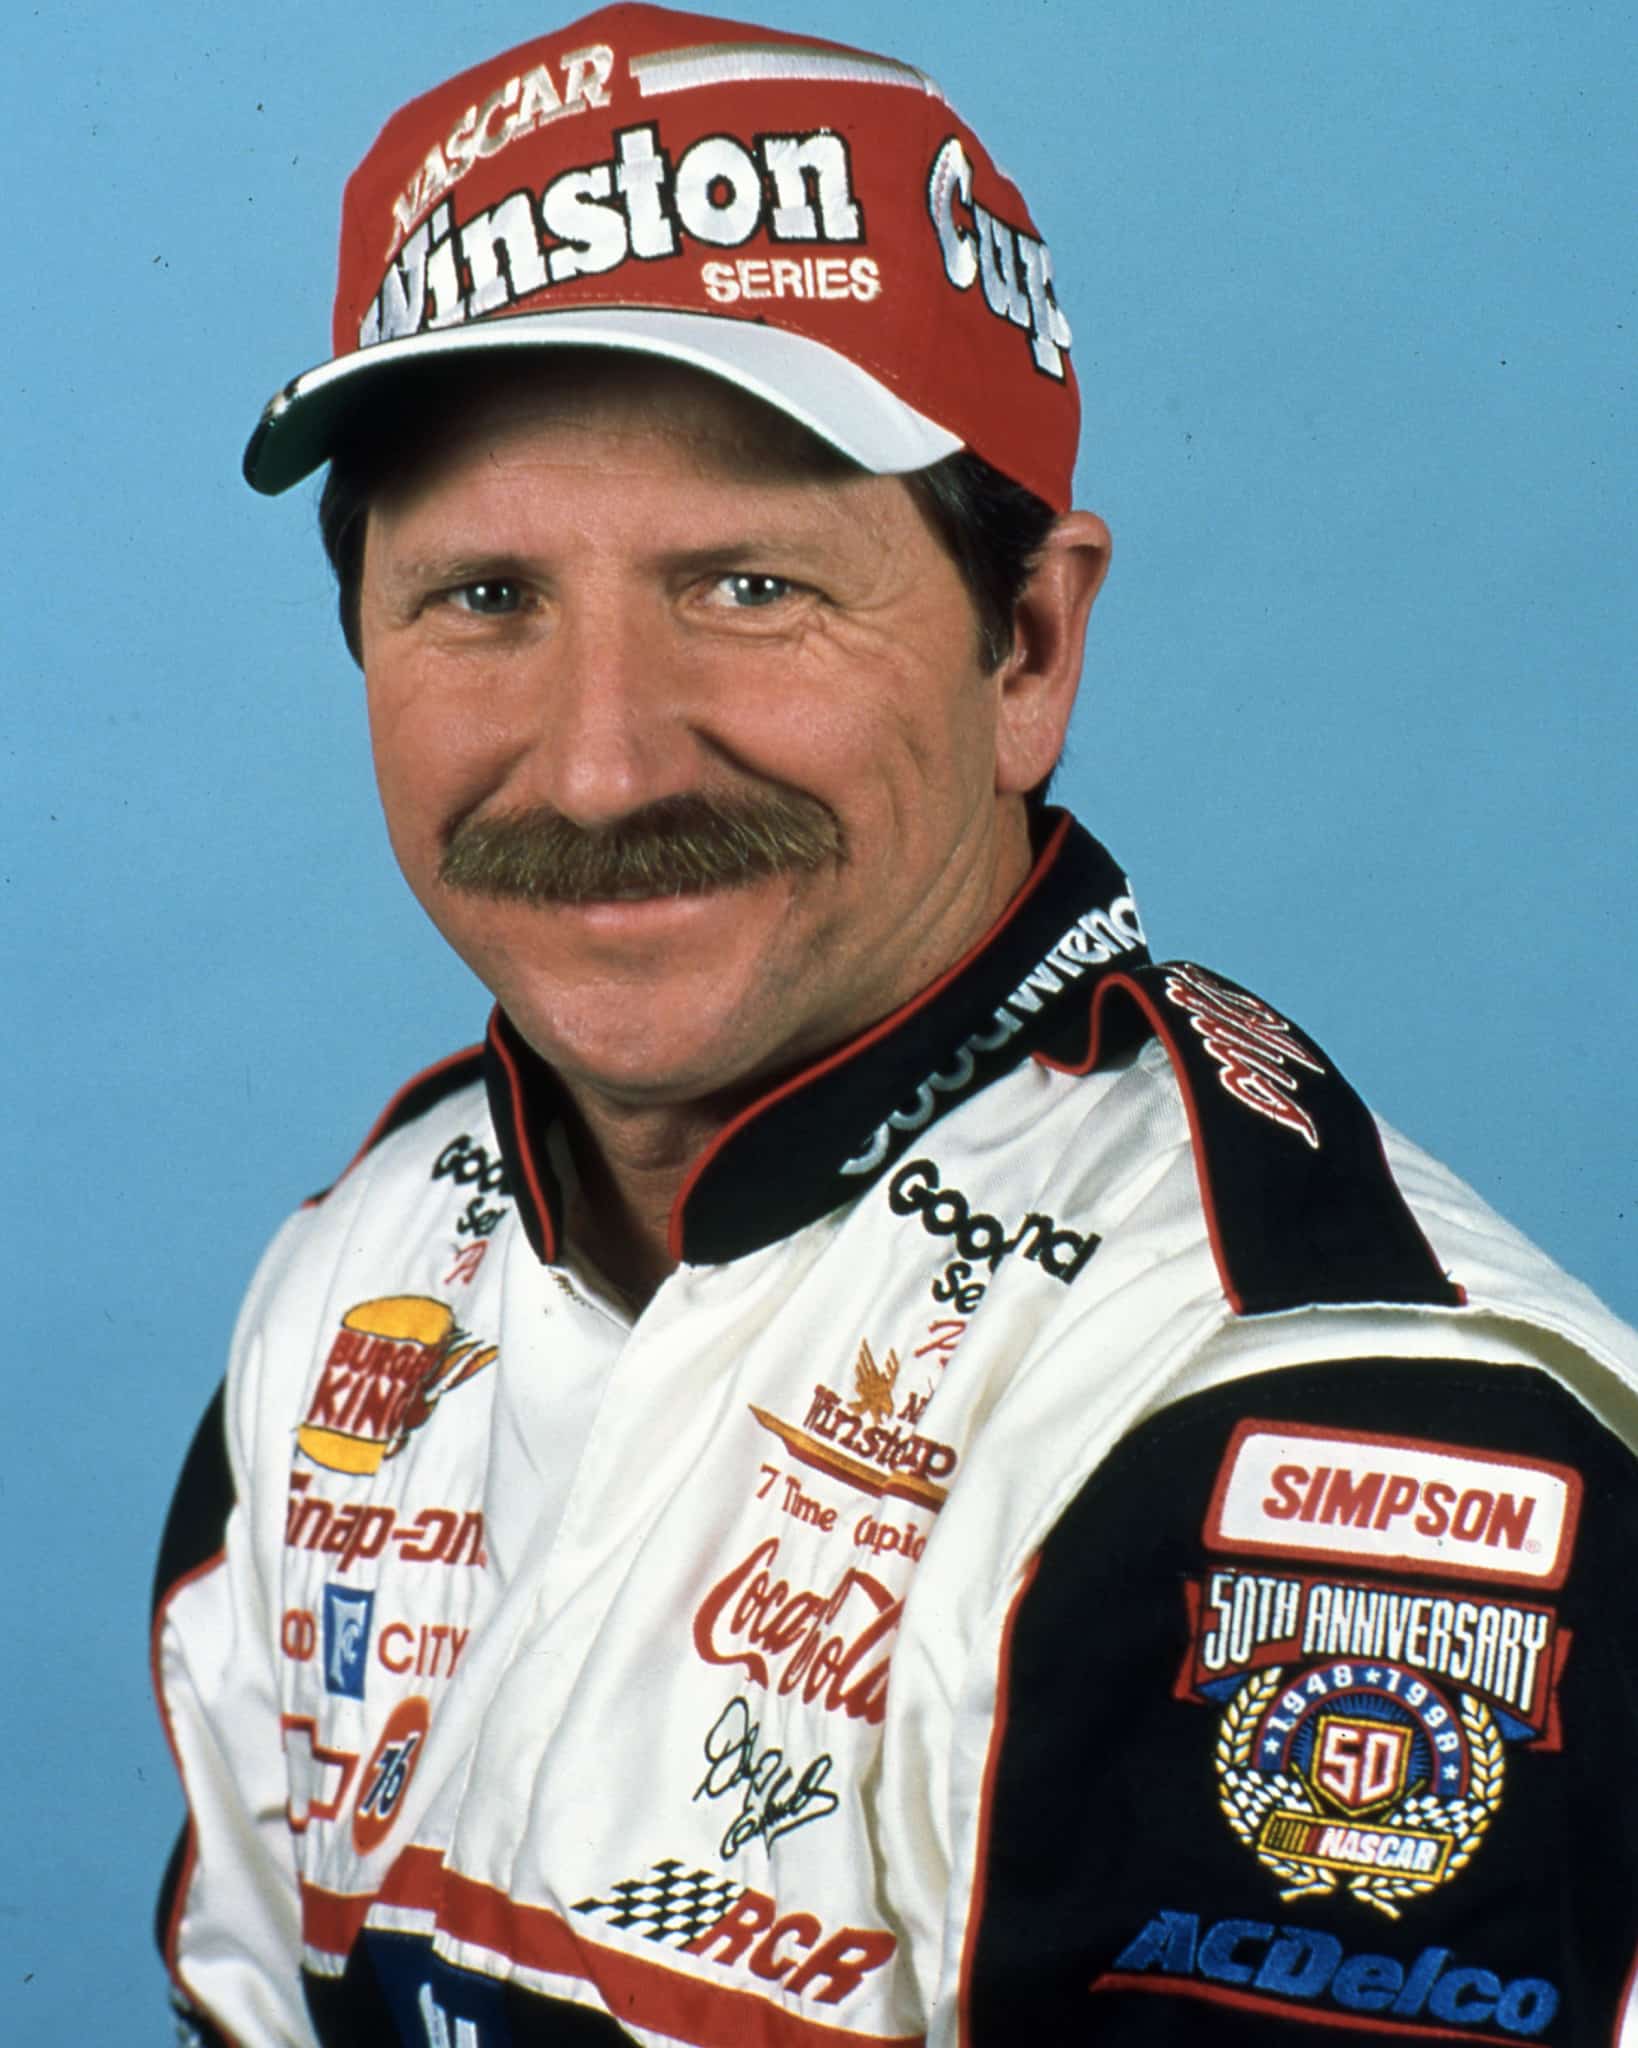 1998: Dale Earnhardt in 1998 livery, showing the NASCAR 50th anniversary patch. (Photo by ISC Archives via Getty Images)